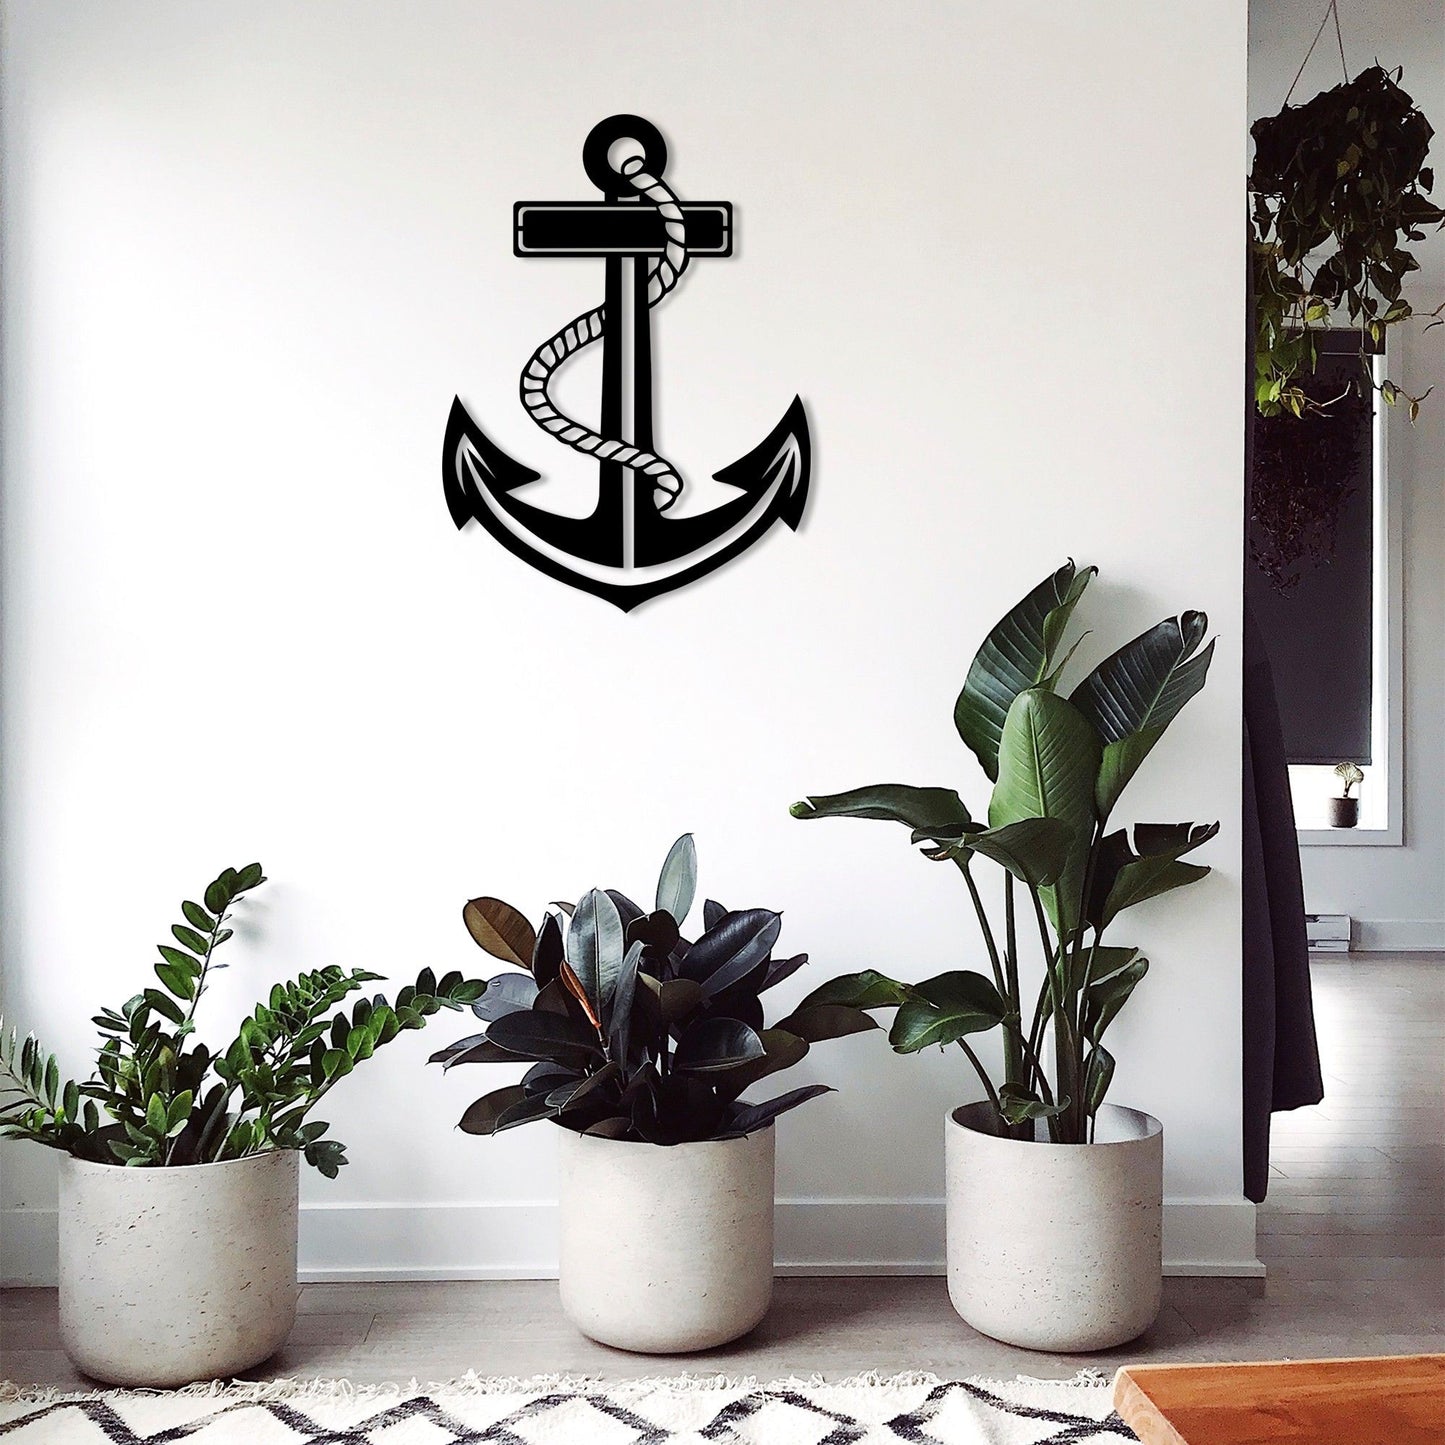 Anchor 3 - Decorative Metal Wall Accessory